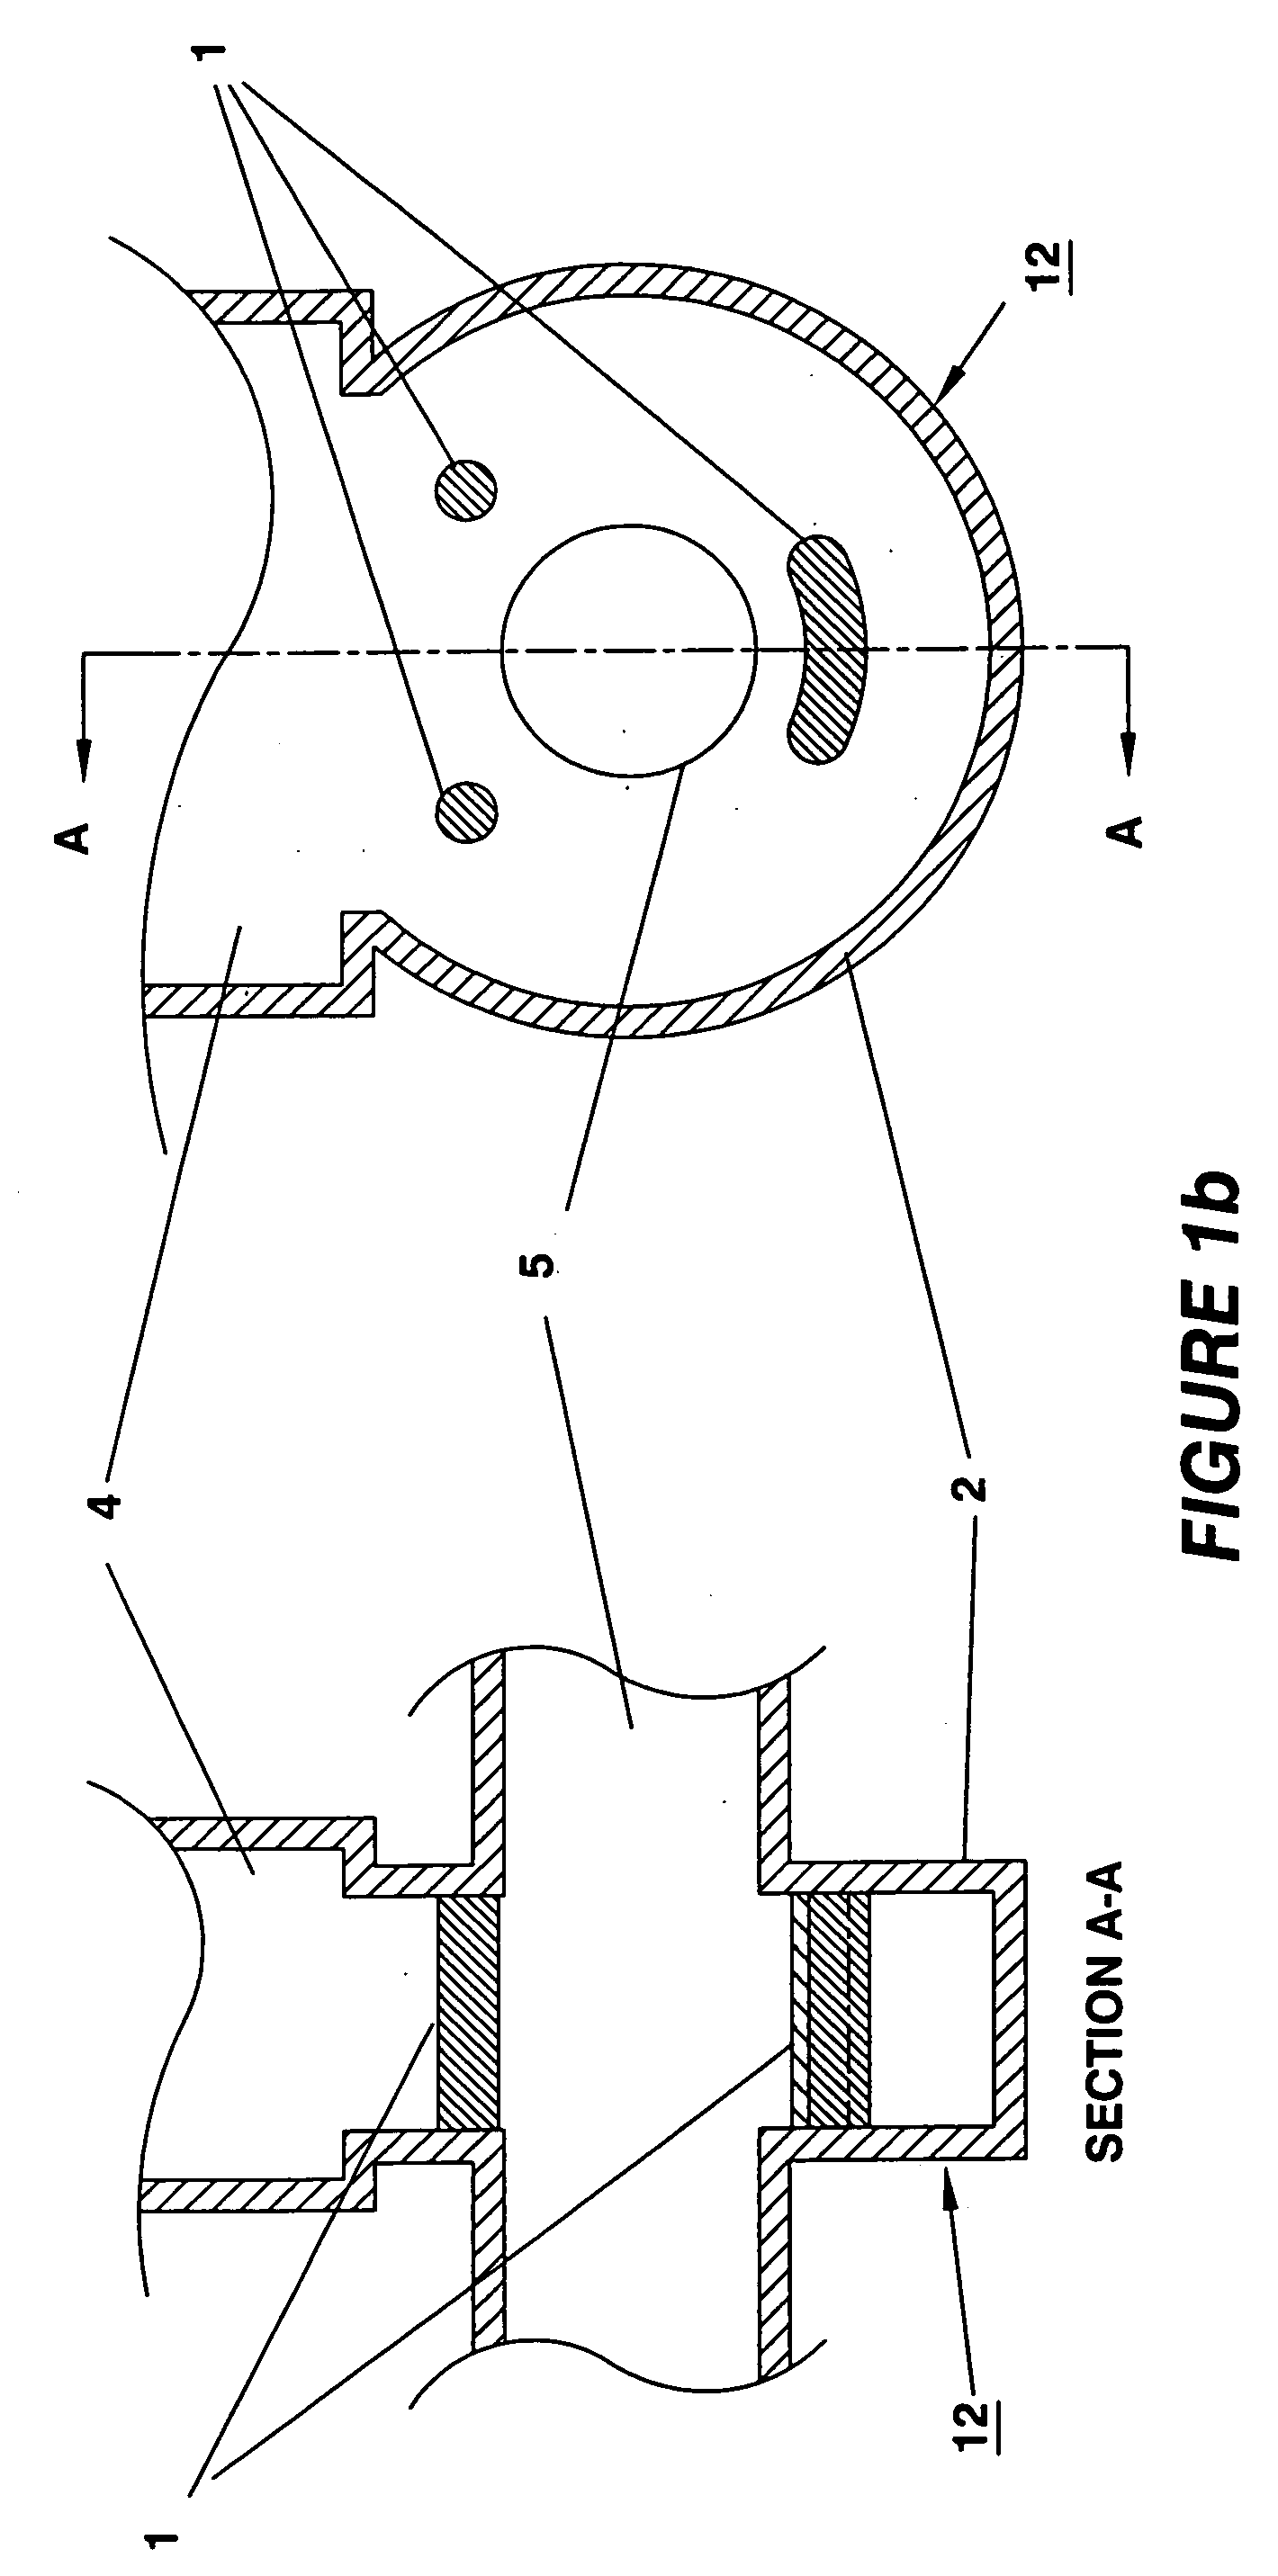 Rod-loaded radiofrequency cavities and couplers